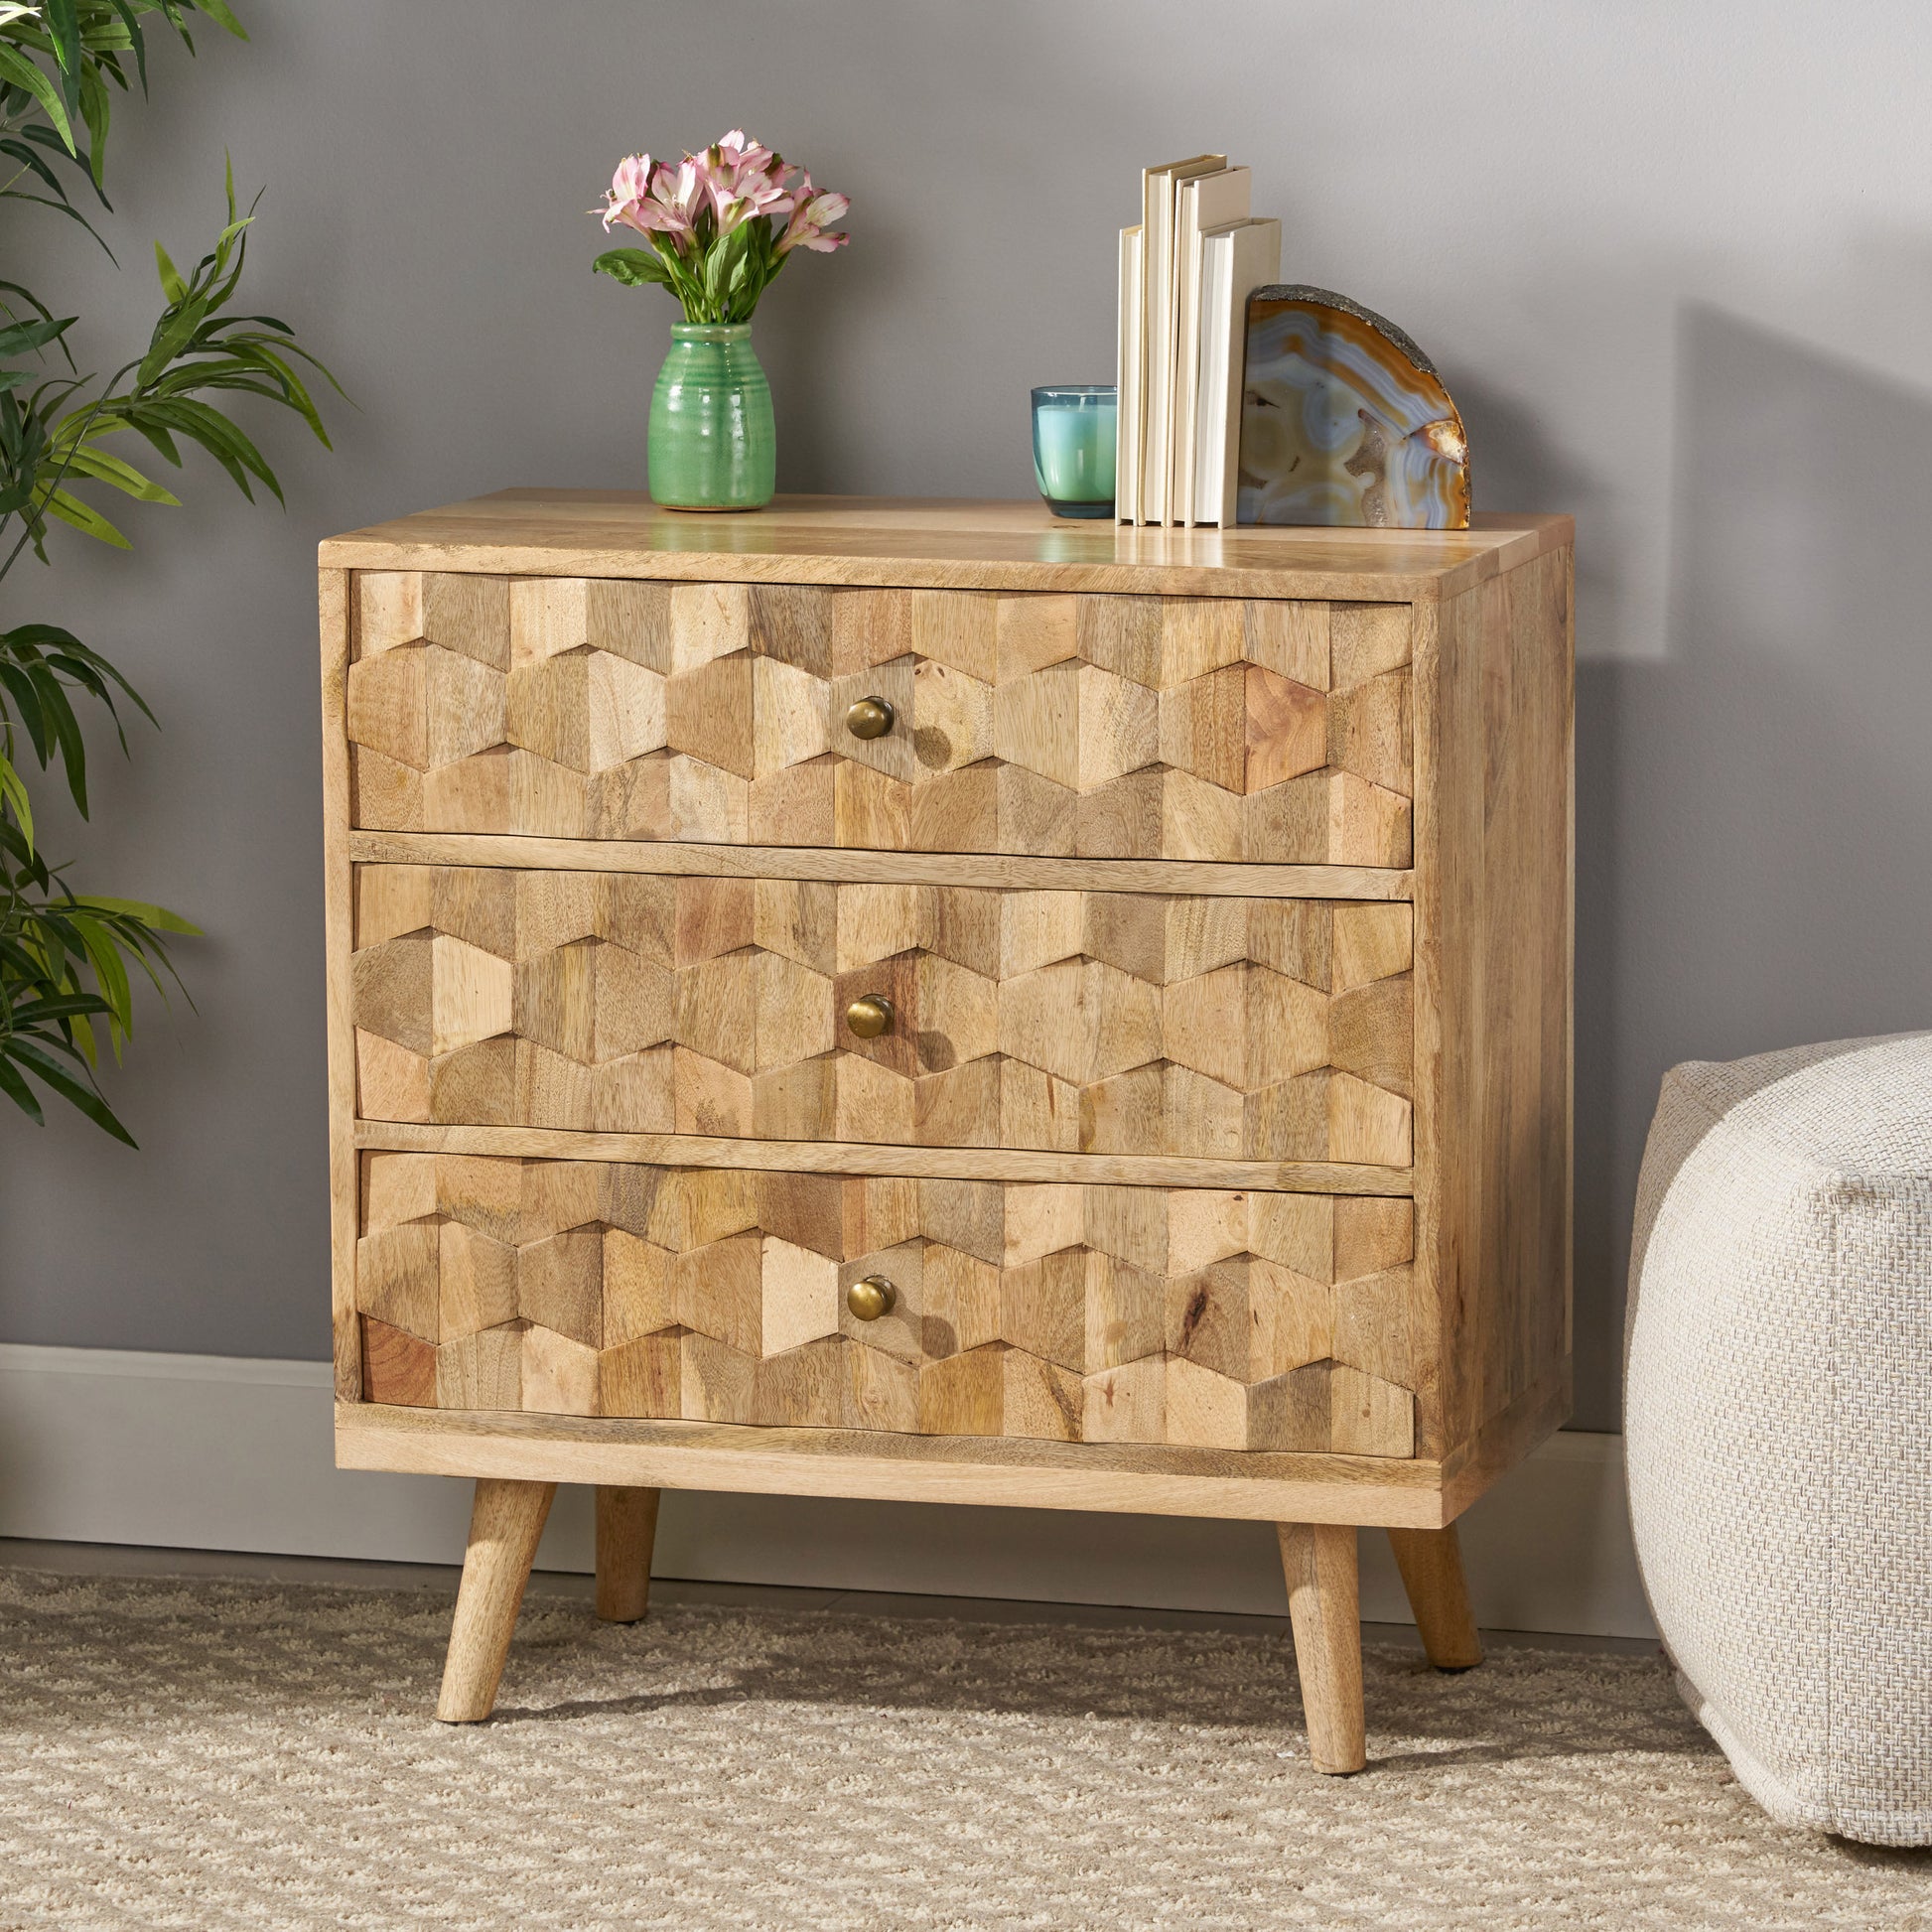 3 Drawer Chest Kd Legs - Natural Wood